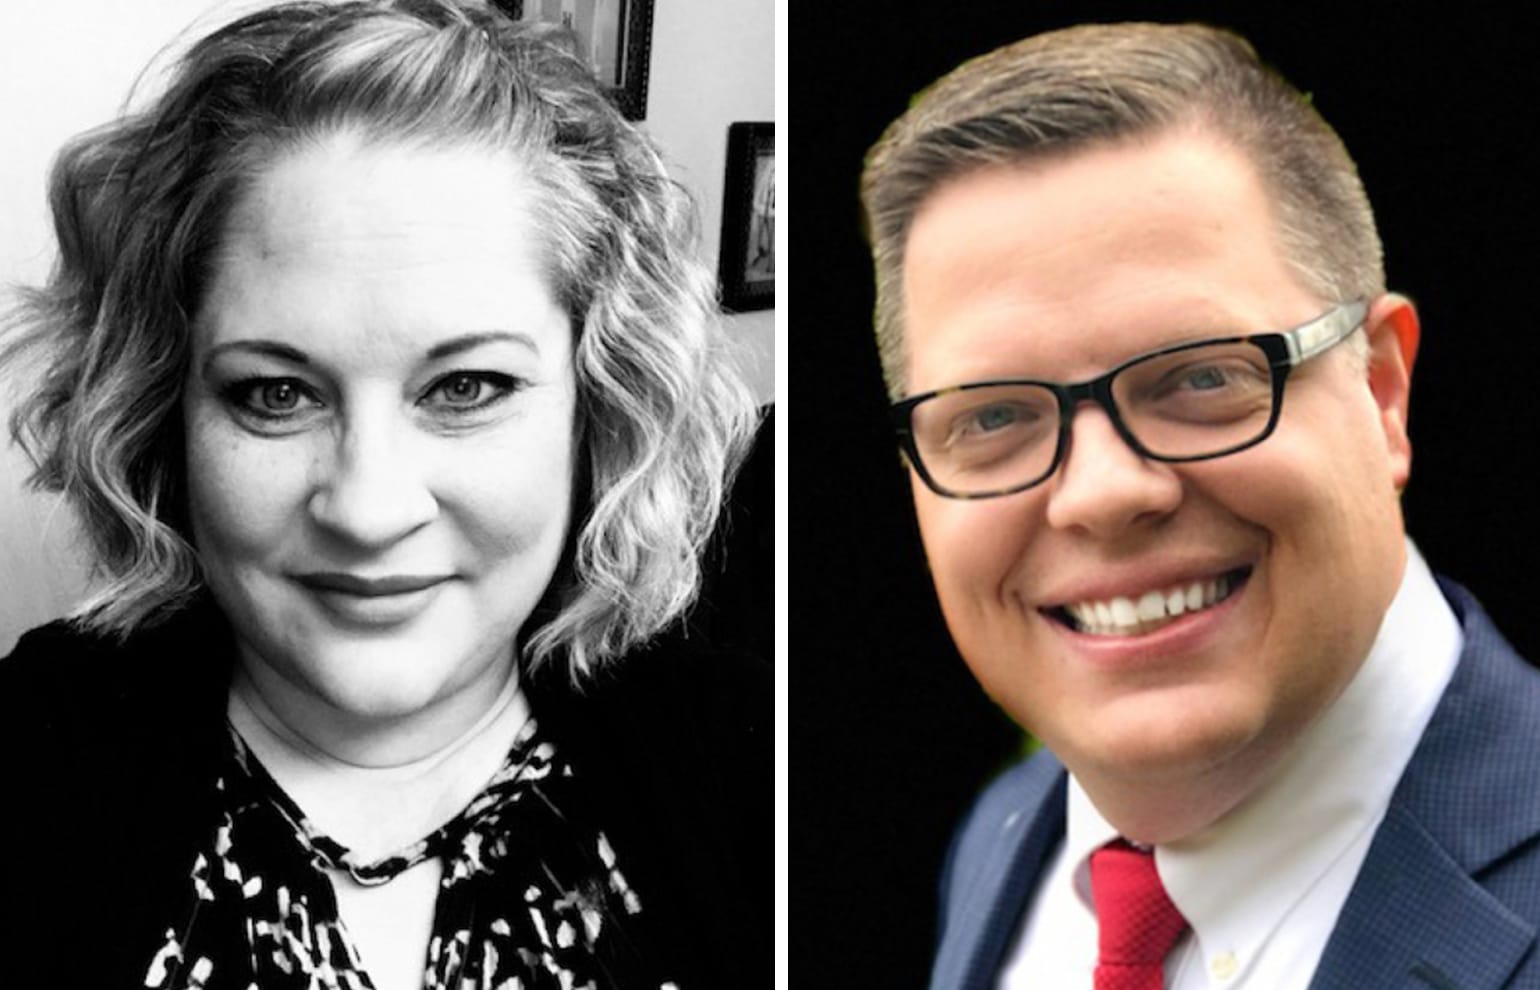 Shauna Walters and Neil Butler advanced from the primary to the general election in the Battle Ground City Council race.